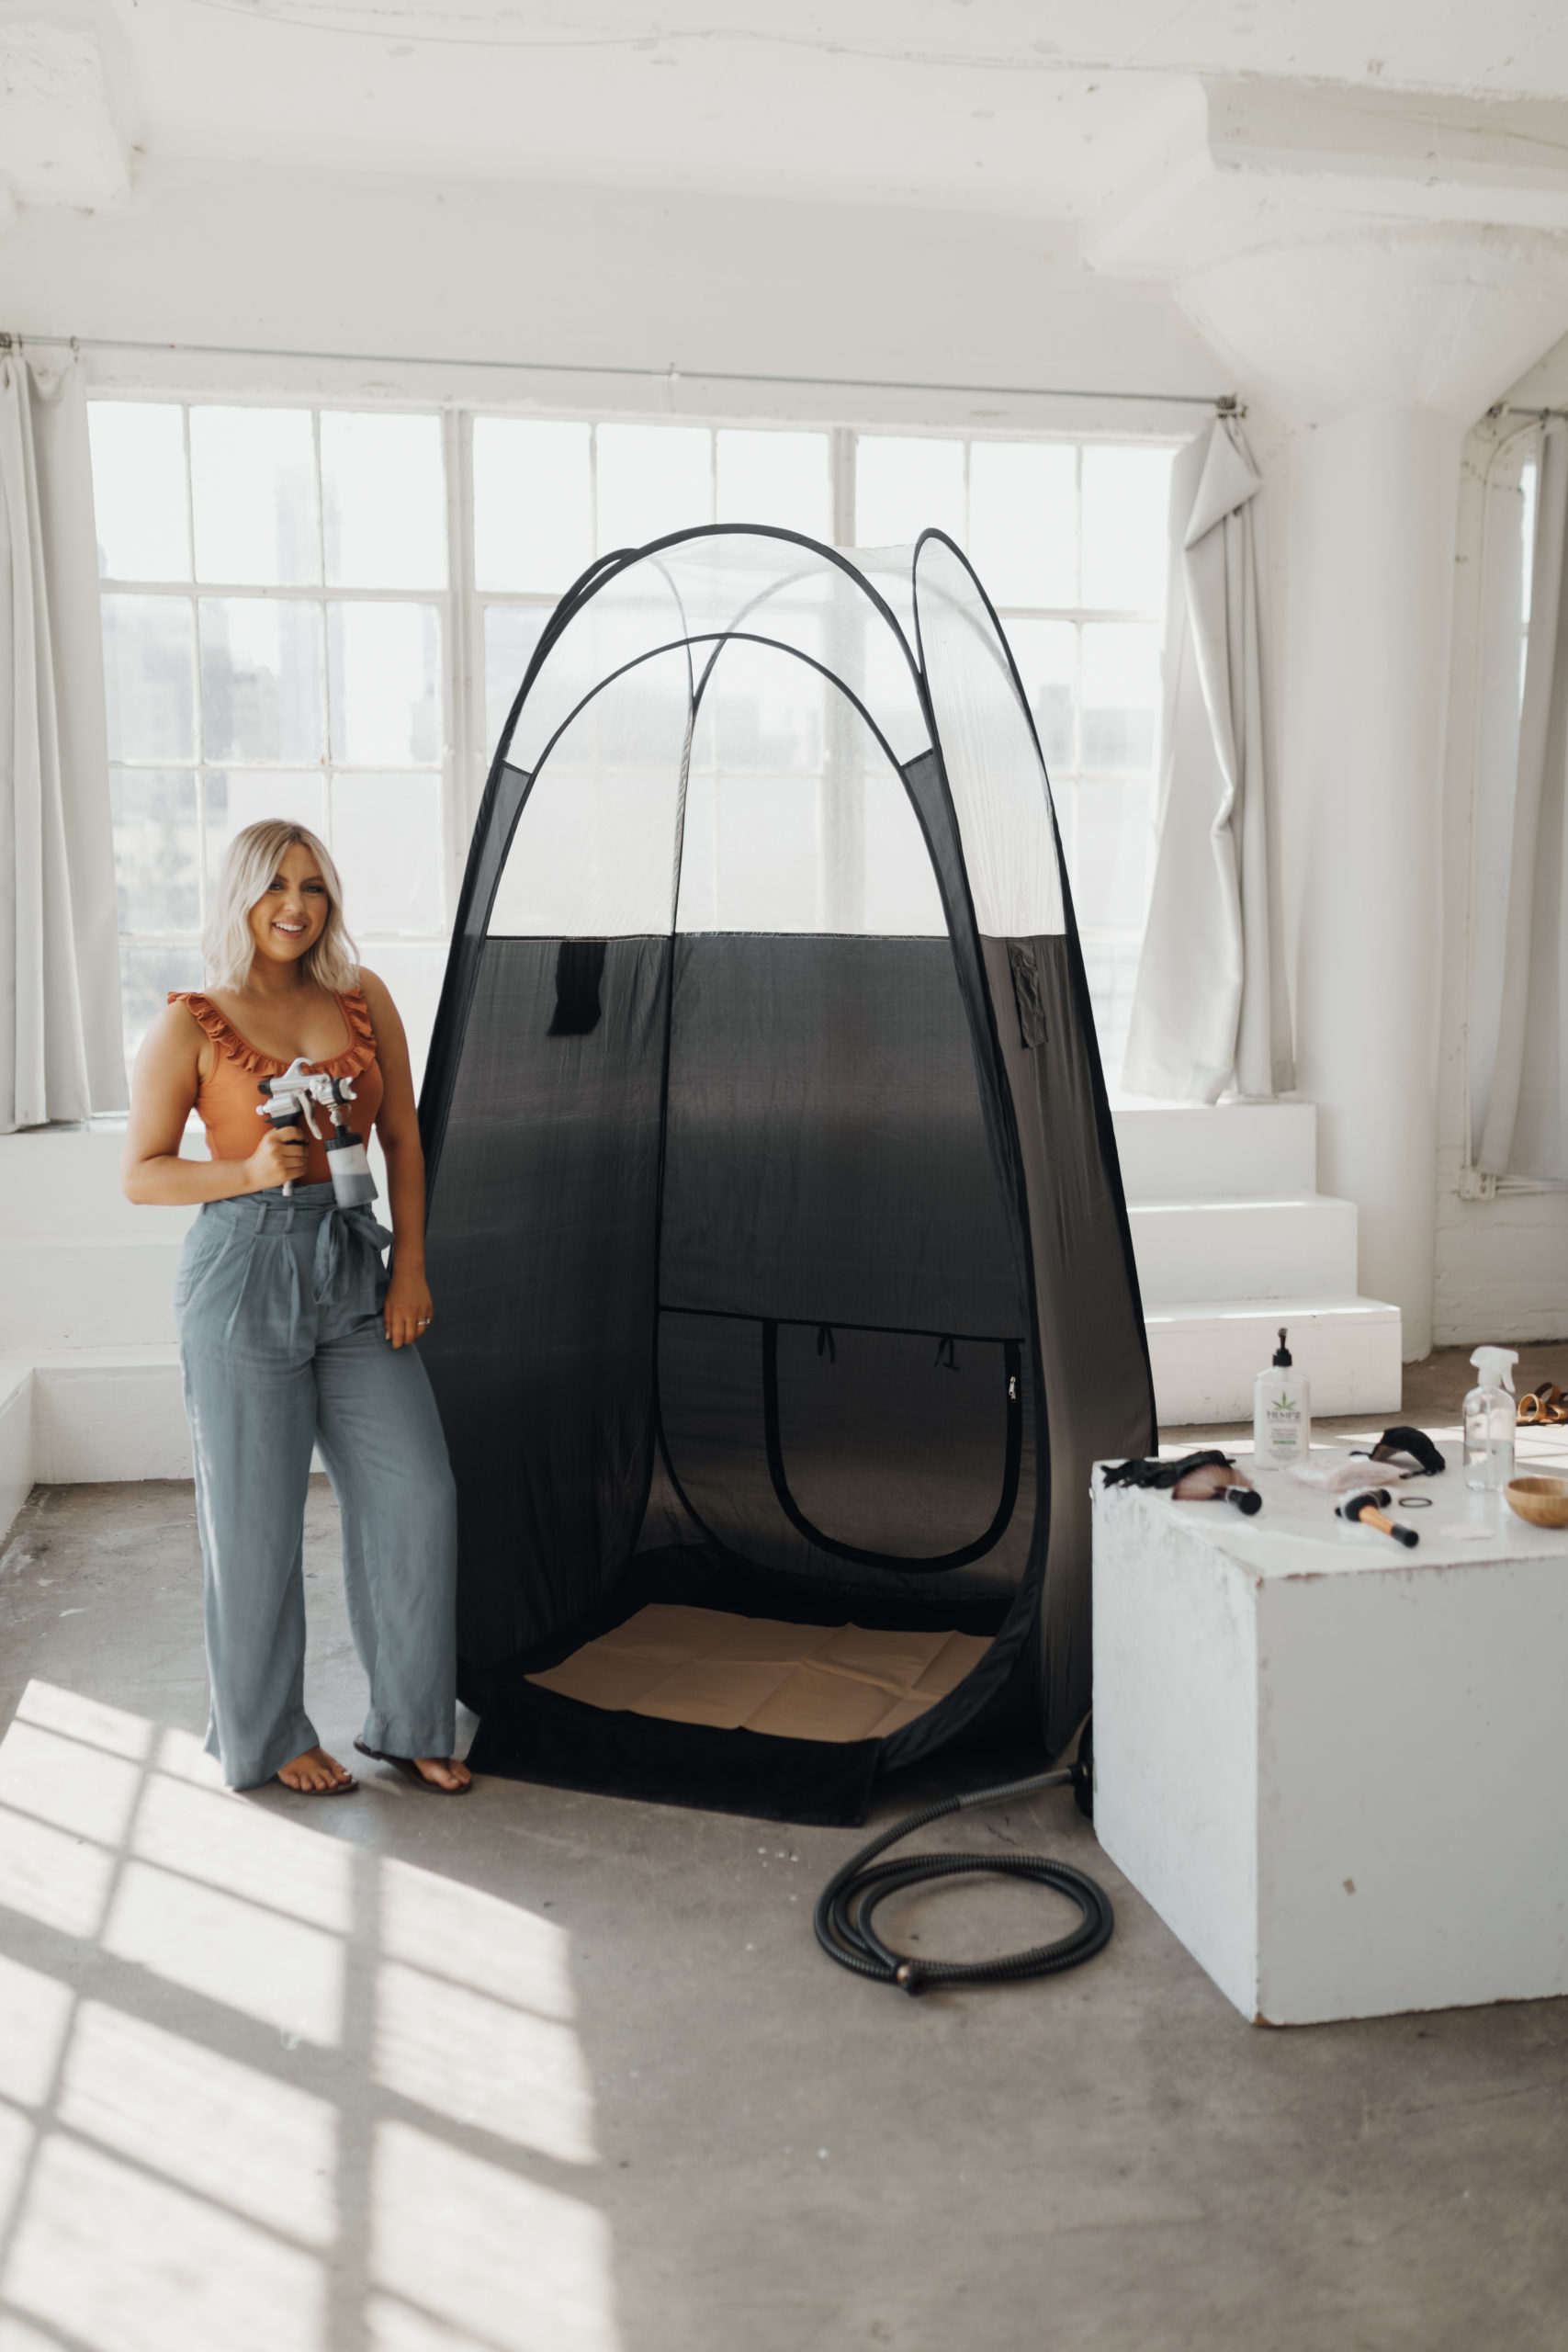 All About Spray Tan Pop-Up Events 